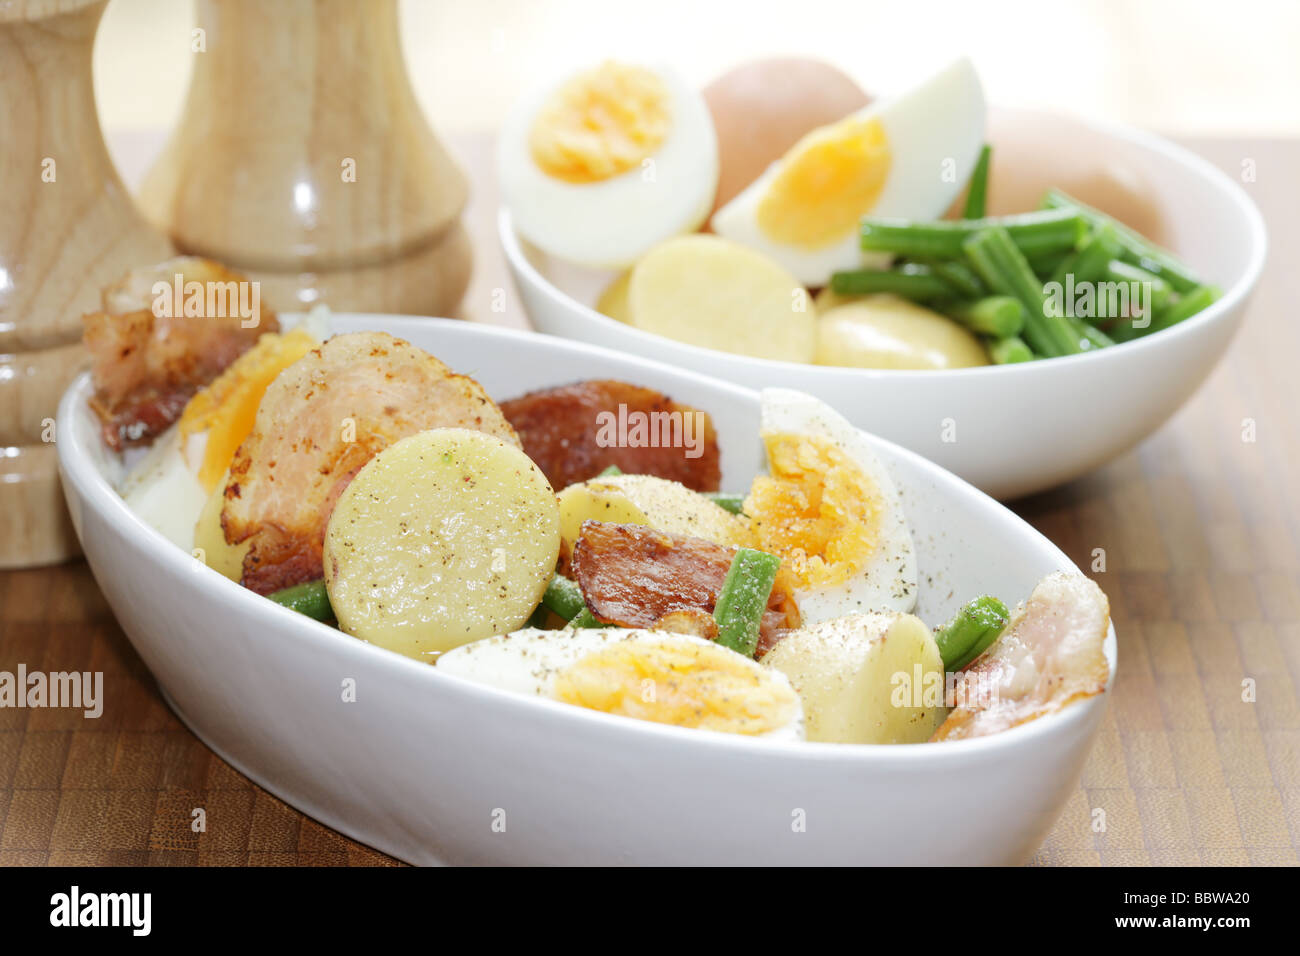 Fresh Healthy Summer Meal Of Hard Boiled Eggs With New Potatoes Bacon And Green Beans And No People Stock Photo